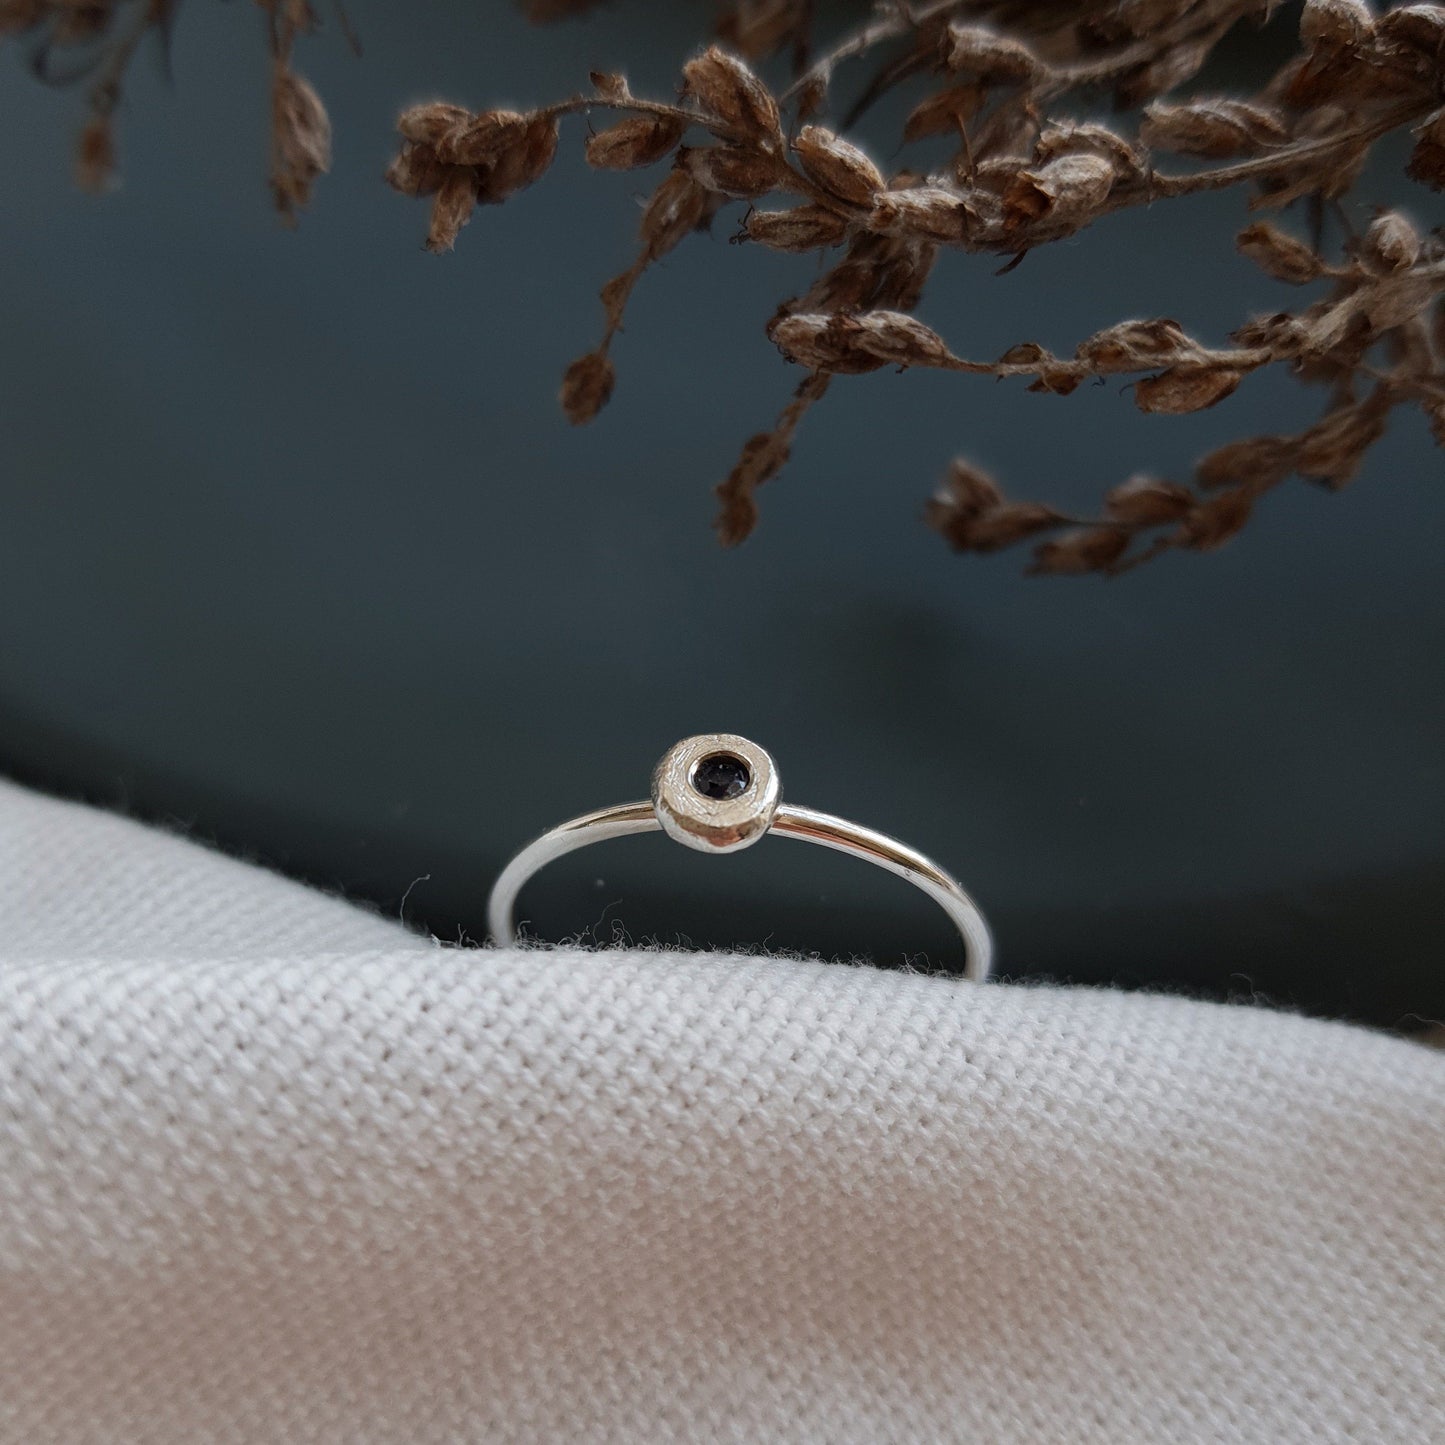 Sapphire & Silver Stacking Ring  - Handmade Silver Stacking Rings by Anna Calvert Jewellery in the UK